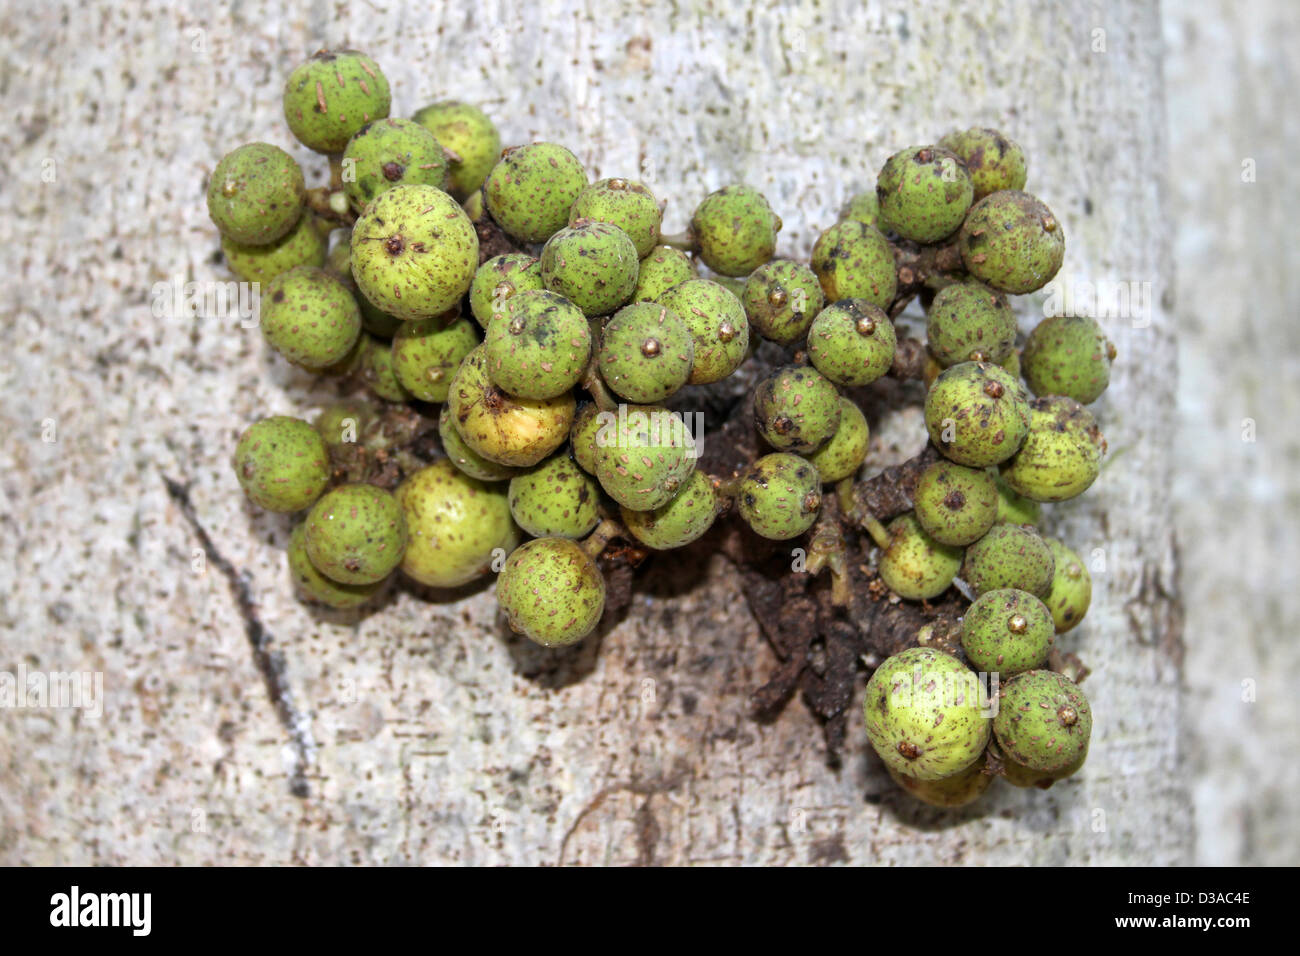 Fruits Growing From The Tree Trunk Of A Fig Tree, Ficus variegata Stock Photo